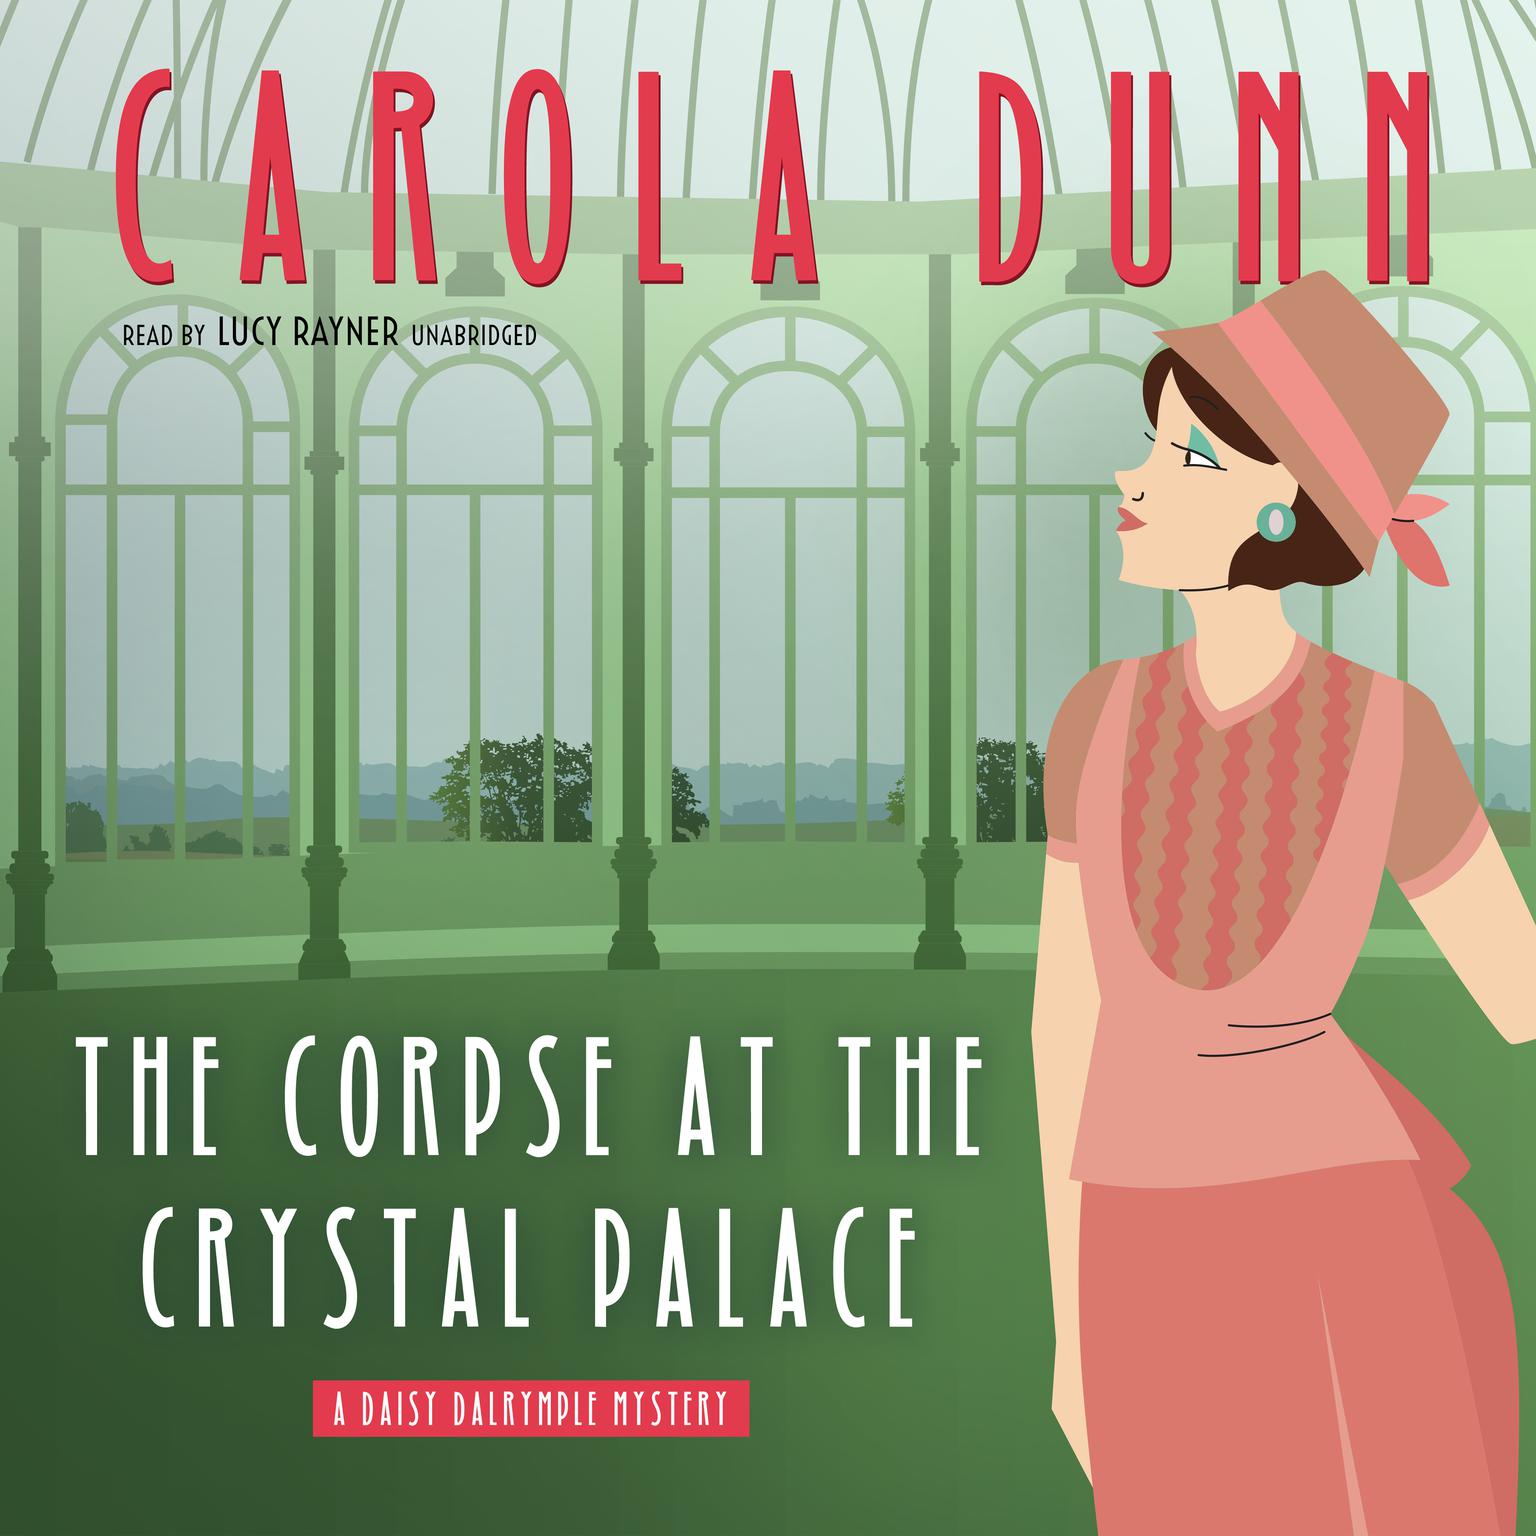 The Corpse at the Crystal Palace: A Daisy Dalrymple Mystery Audiobook, by Carola Dunn